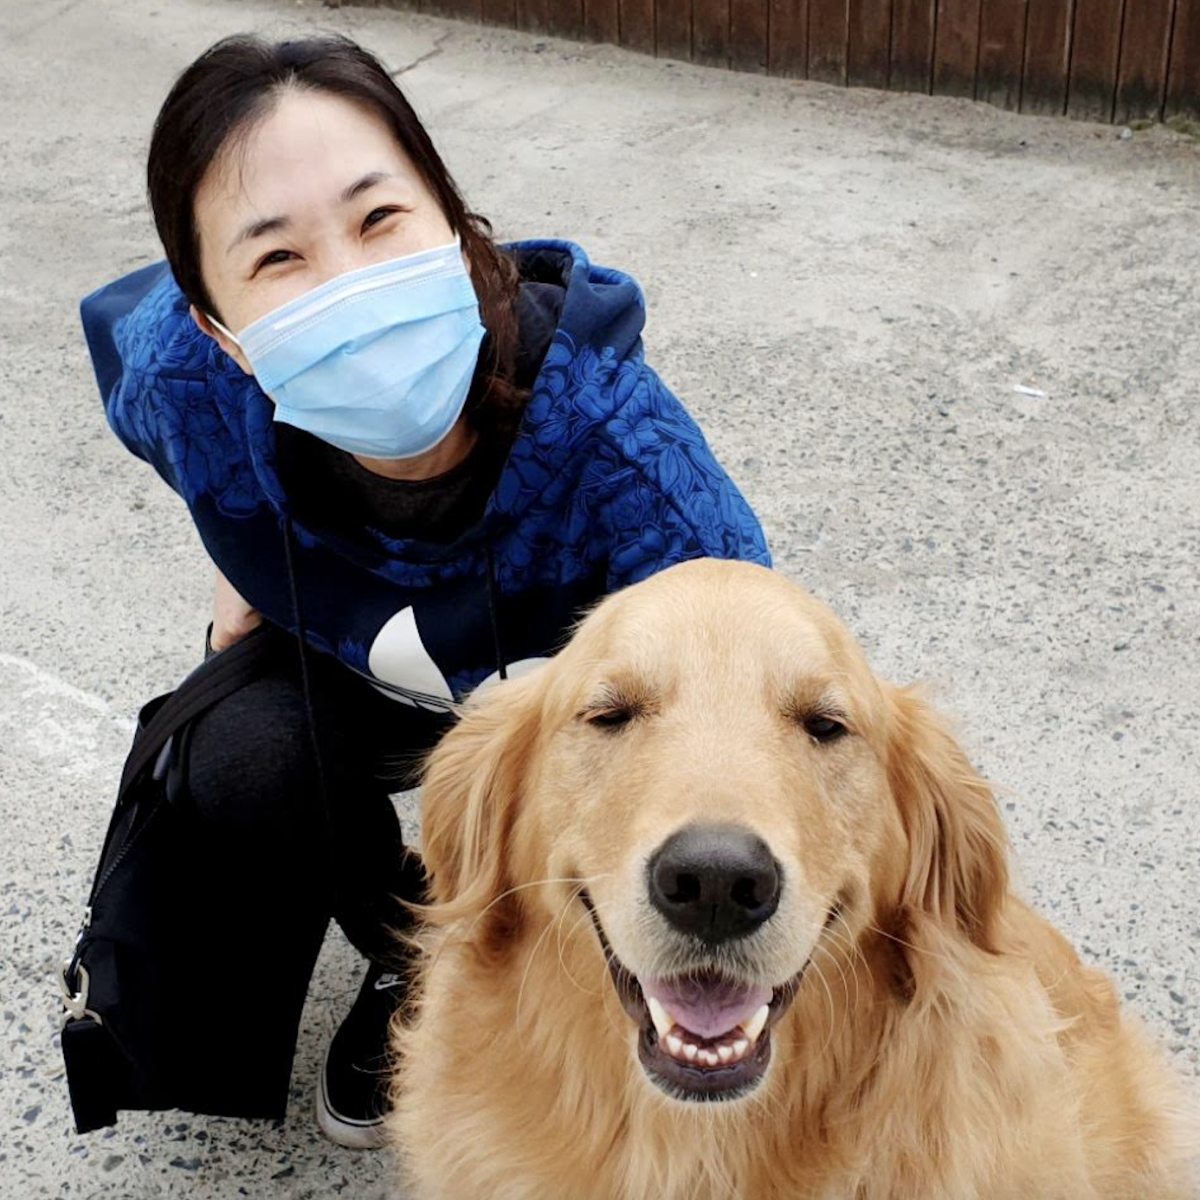 Mrs. Je squats down to take a photo with her favorite animal – a golden retriever. She met the dog in front of a Gukbap restaurant. Photo courtesy of Mrs. Je.